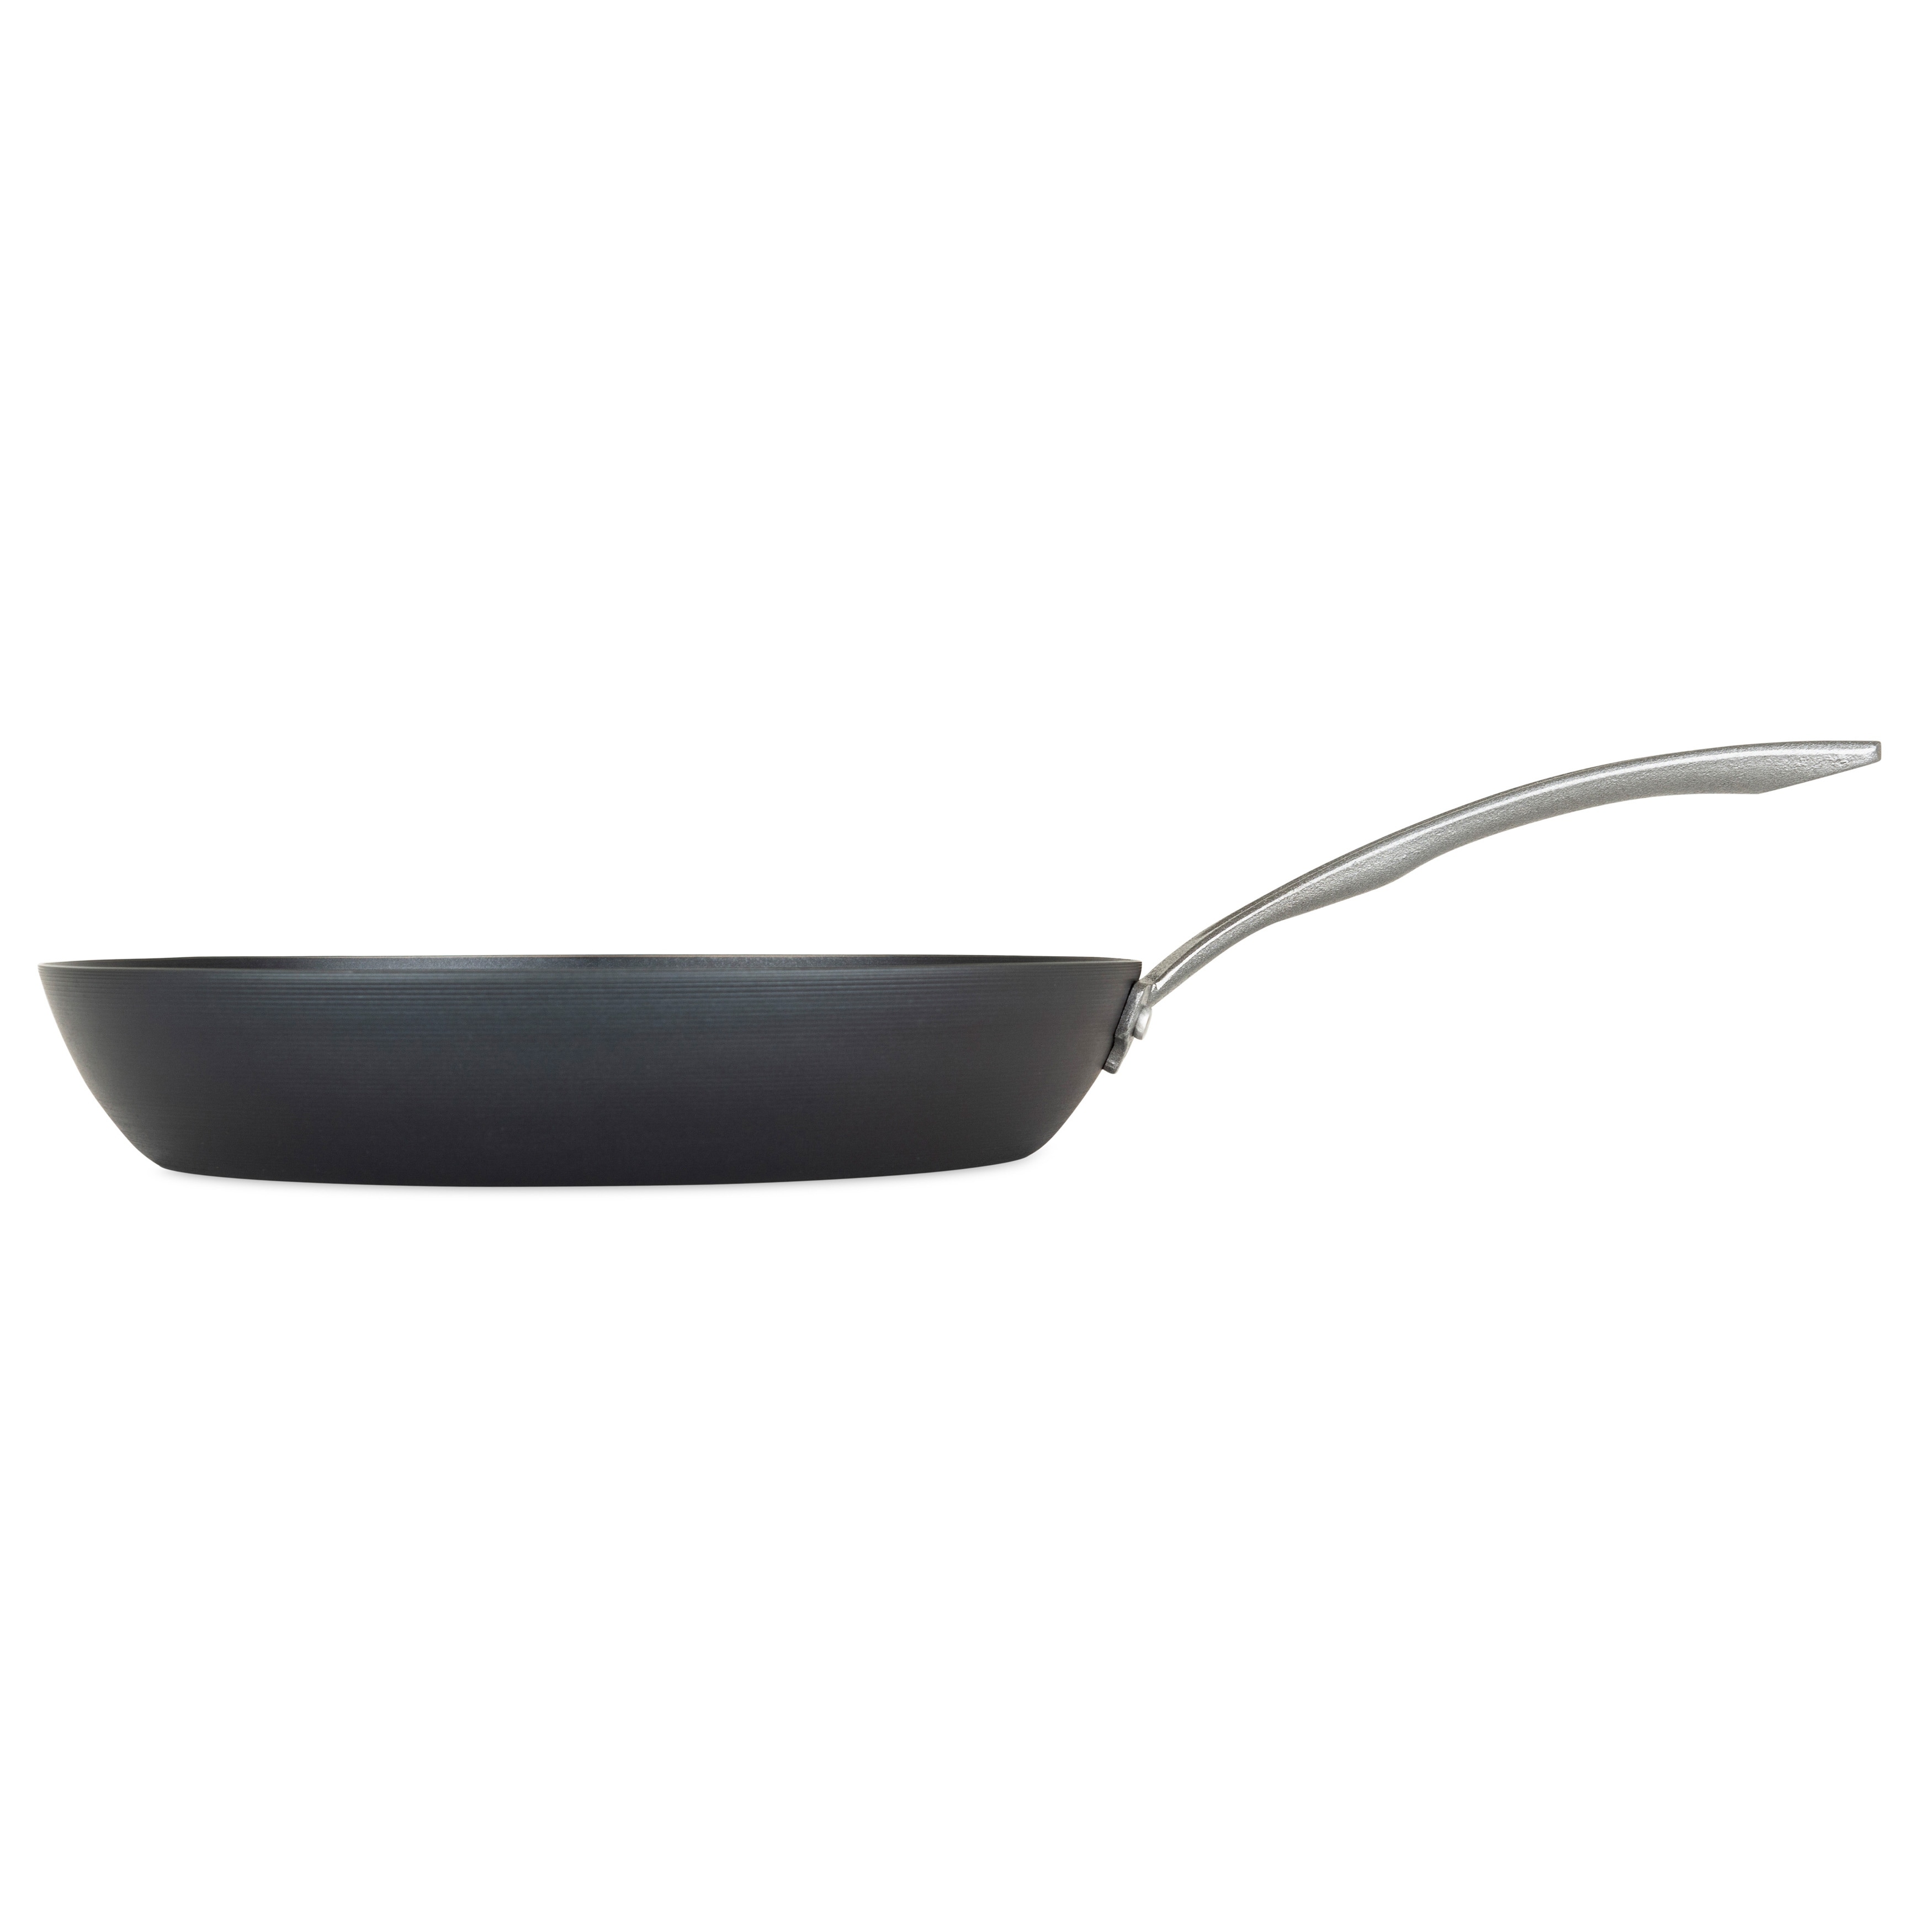 https://ak1.ostkcdn.com/images/products/is/images/direct/d84da6e696ee5471369f188013cf9f020abc8025/Viking-12-in-Blue-Carbon-Steel-Fry-Pan.jpg